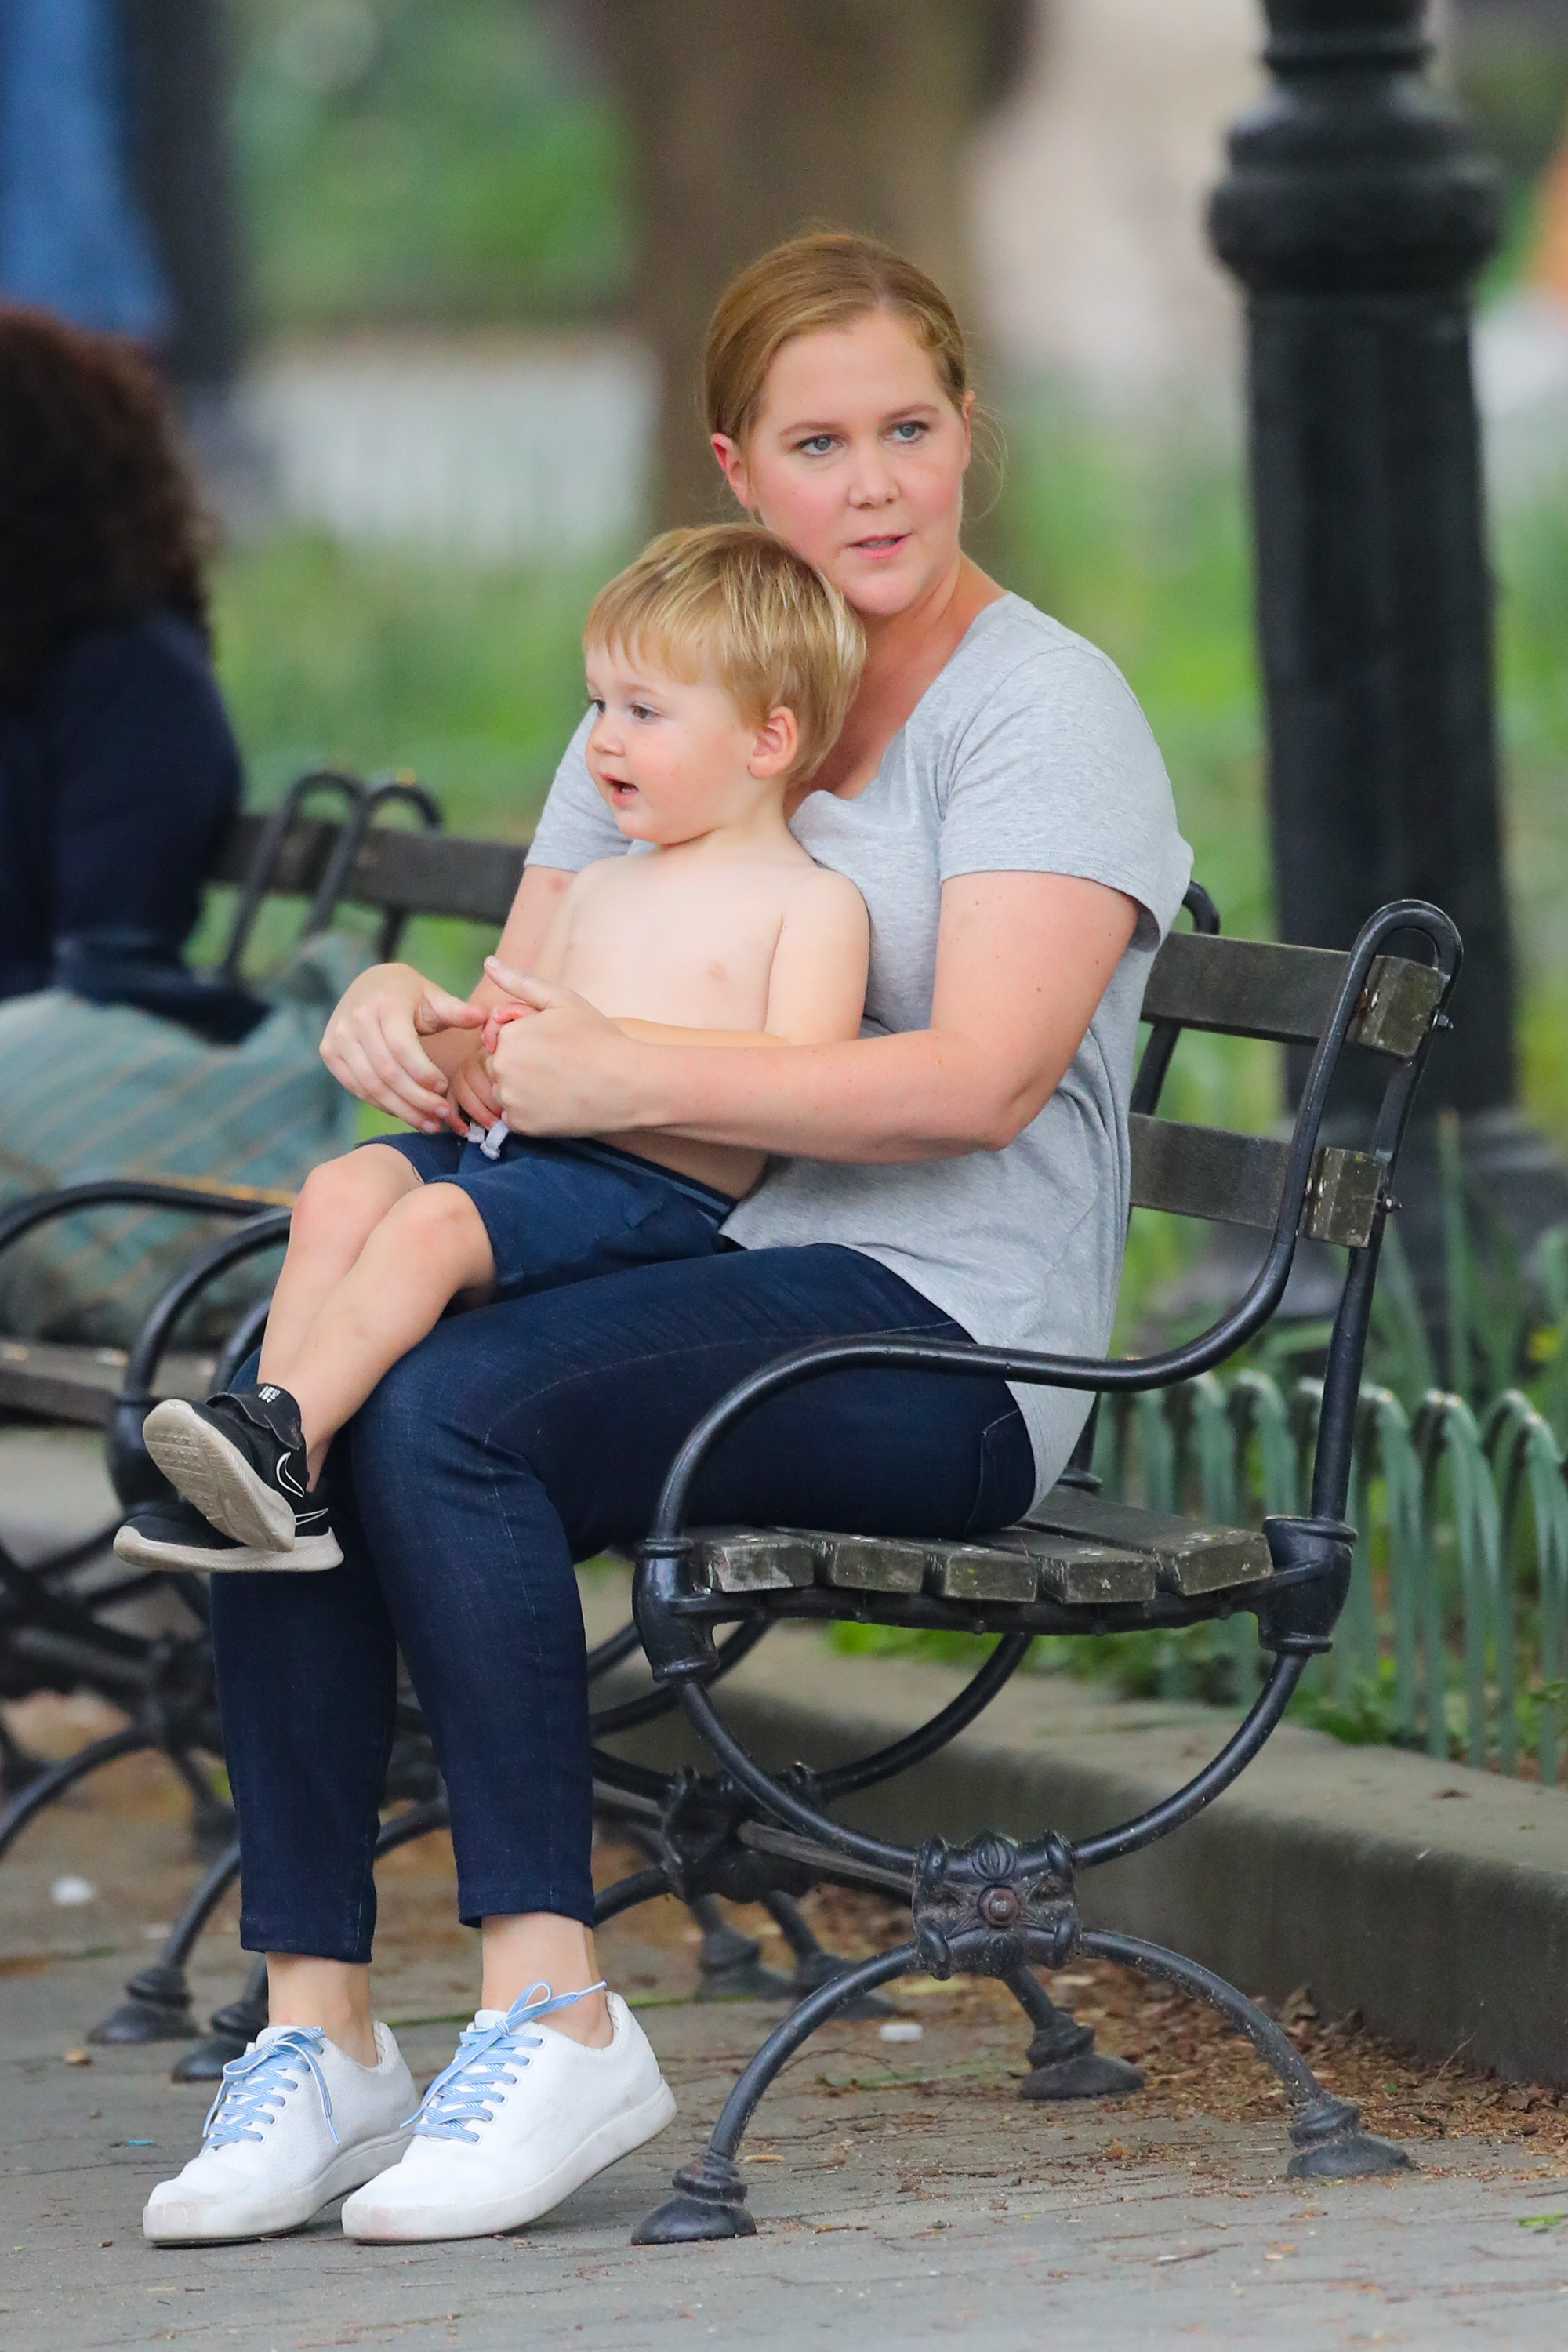 Amy sits on a bench with her child